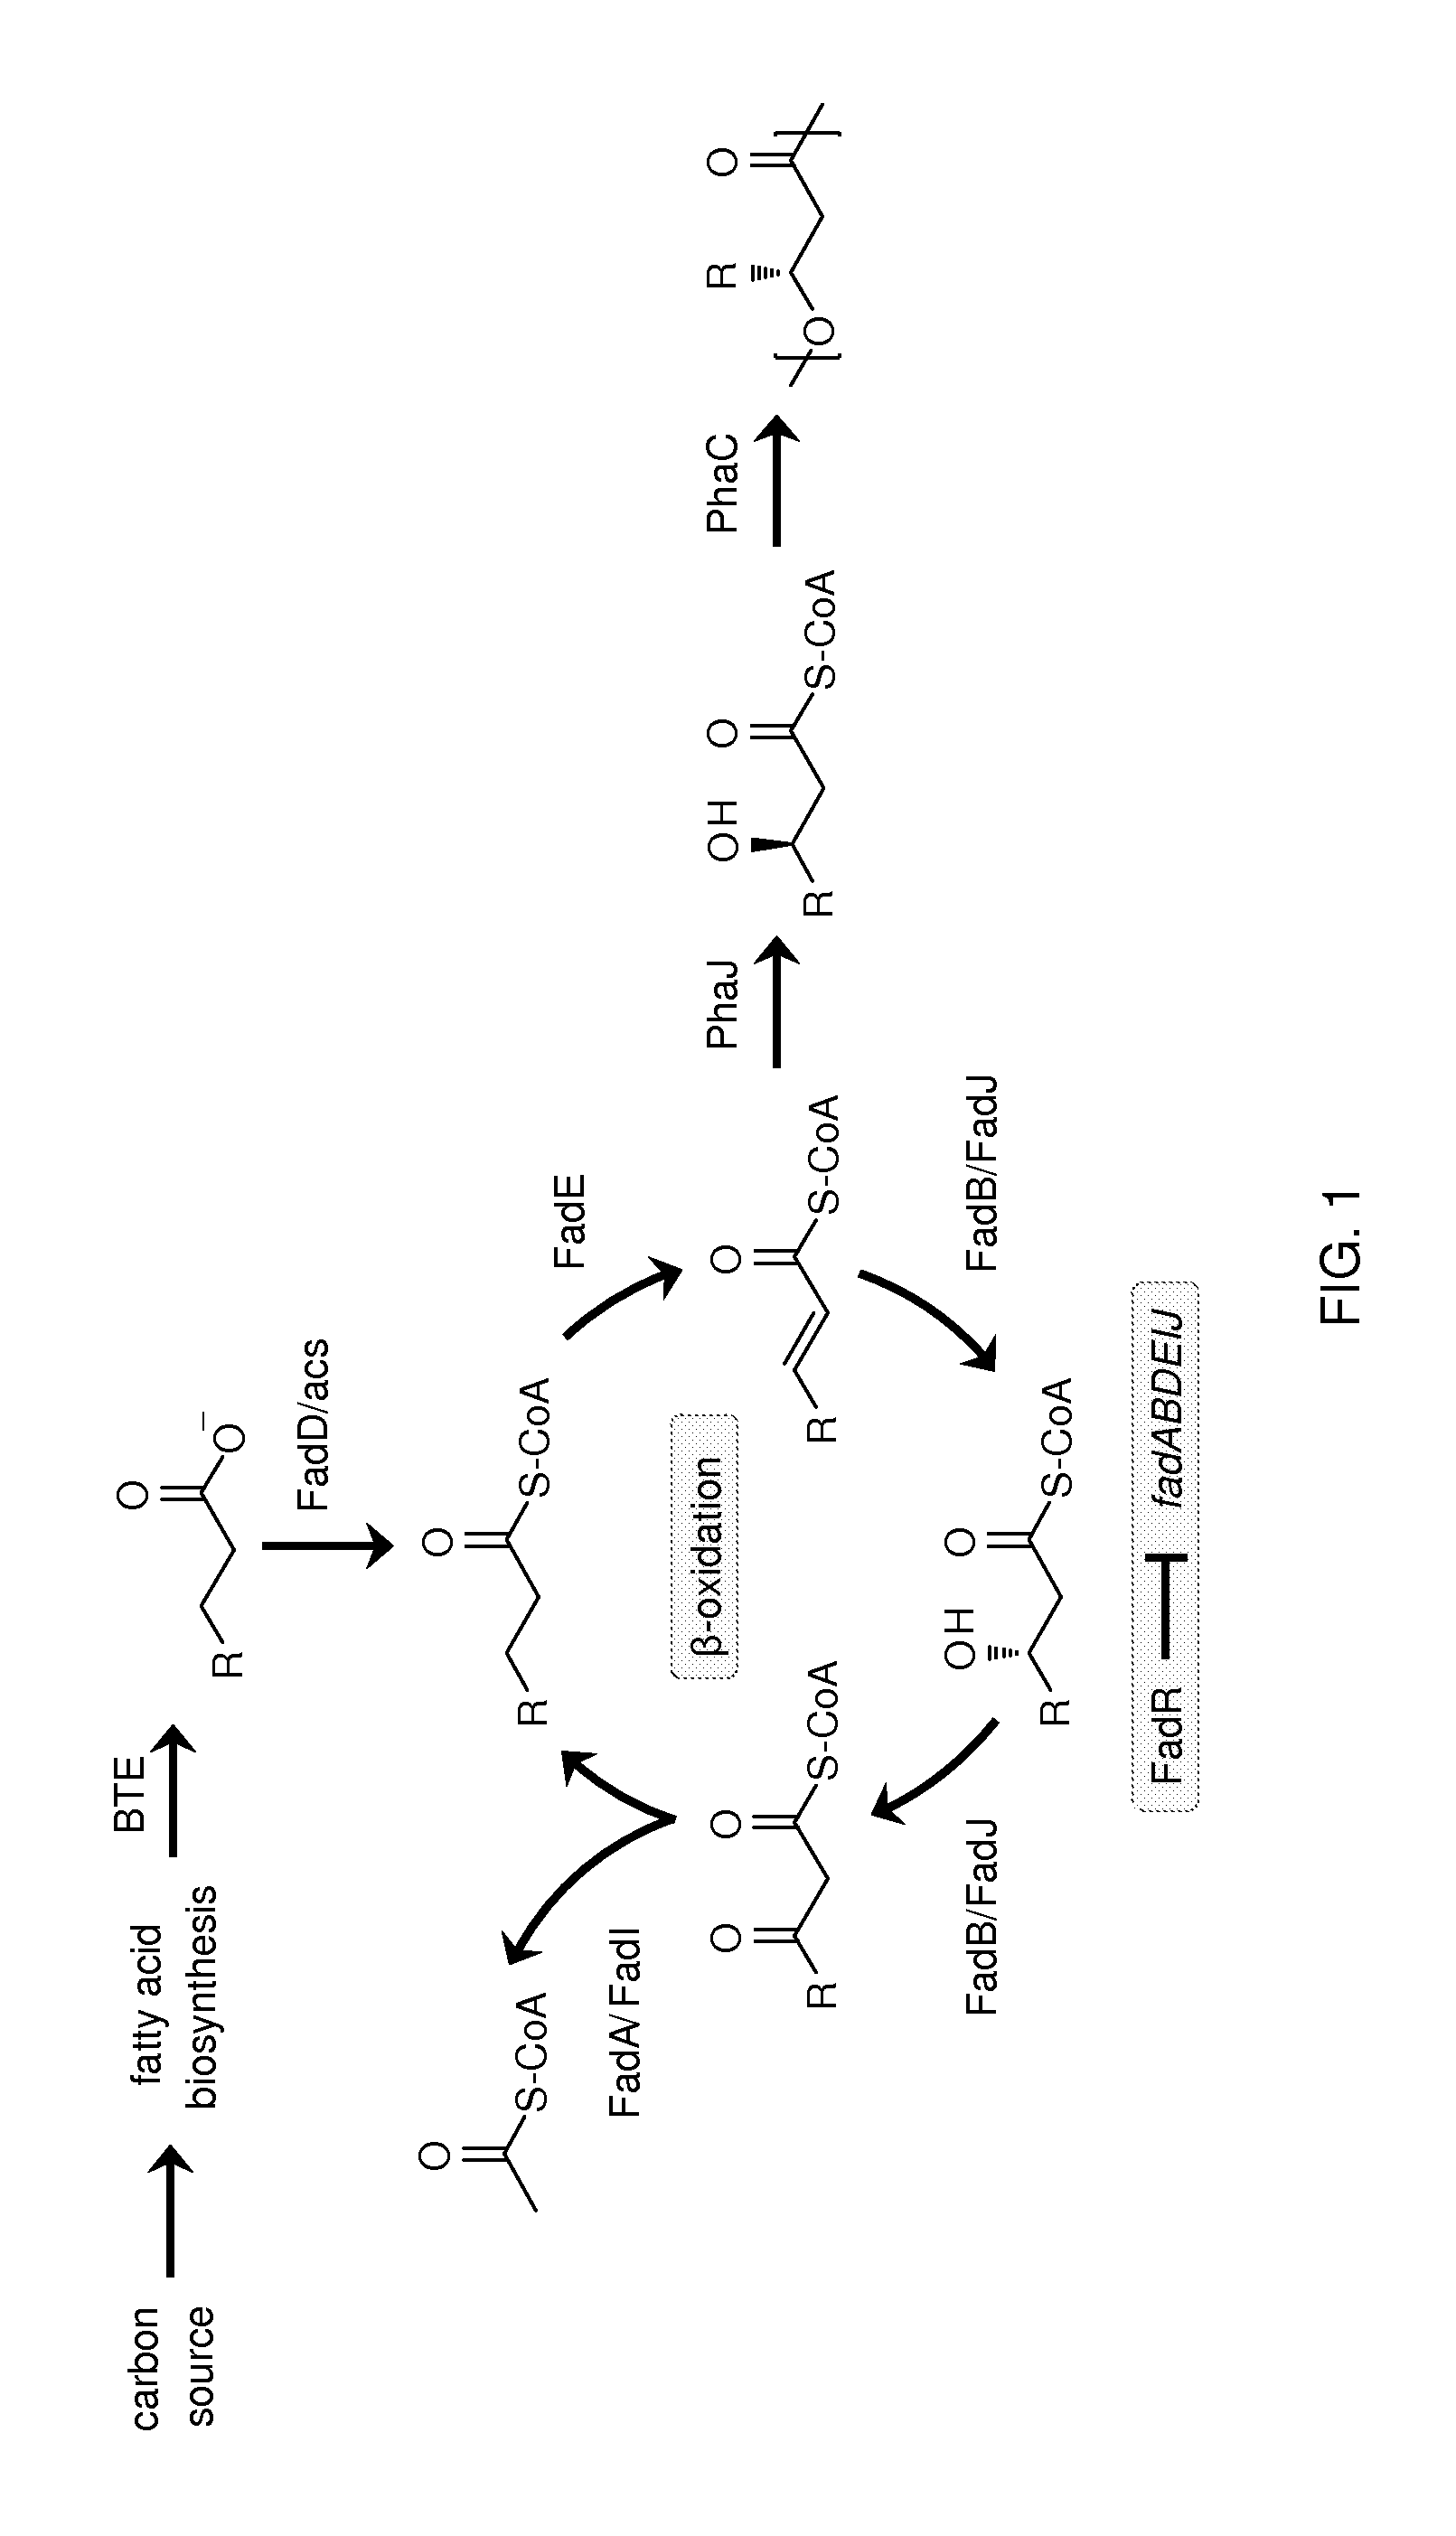 Production of polyhydroxyalkanoates with a defined composition from an unrelated carbon source